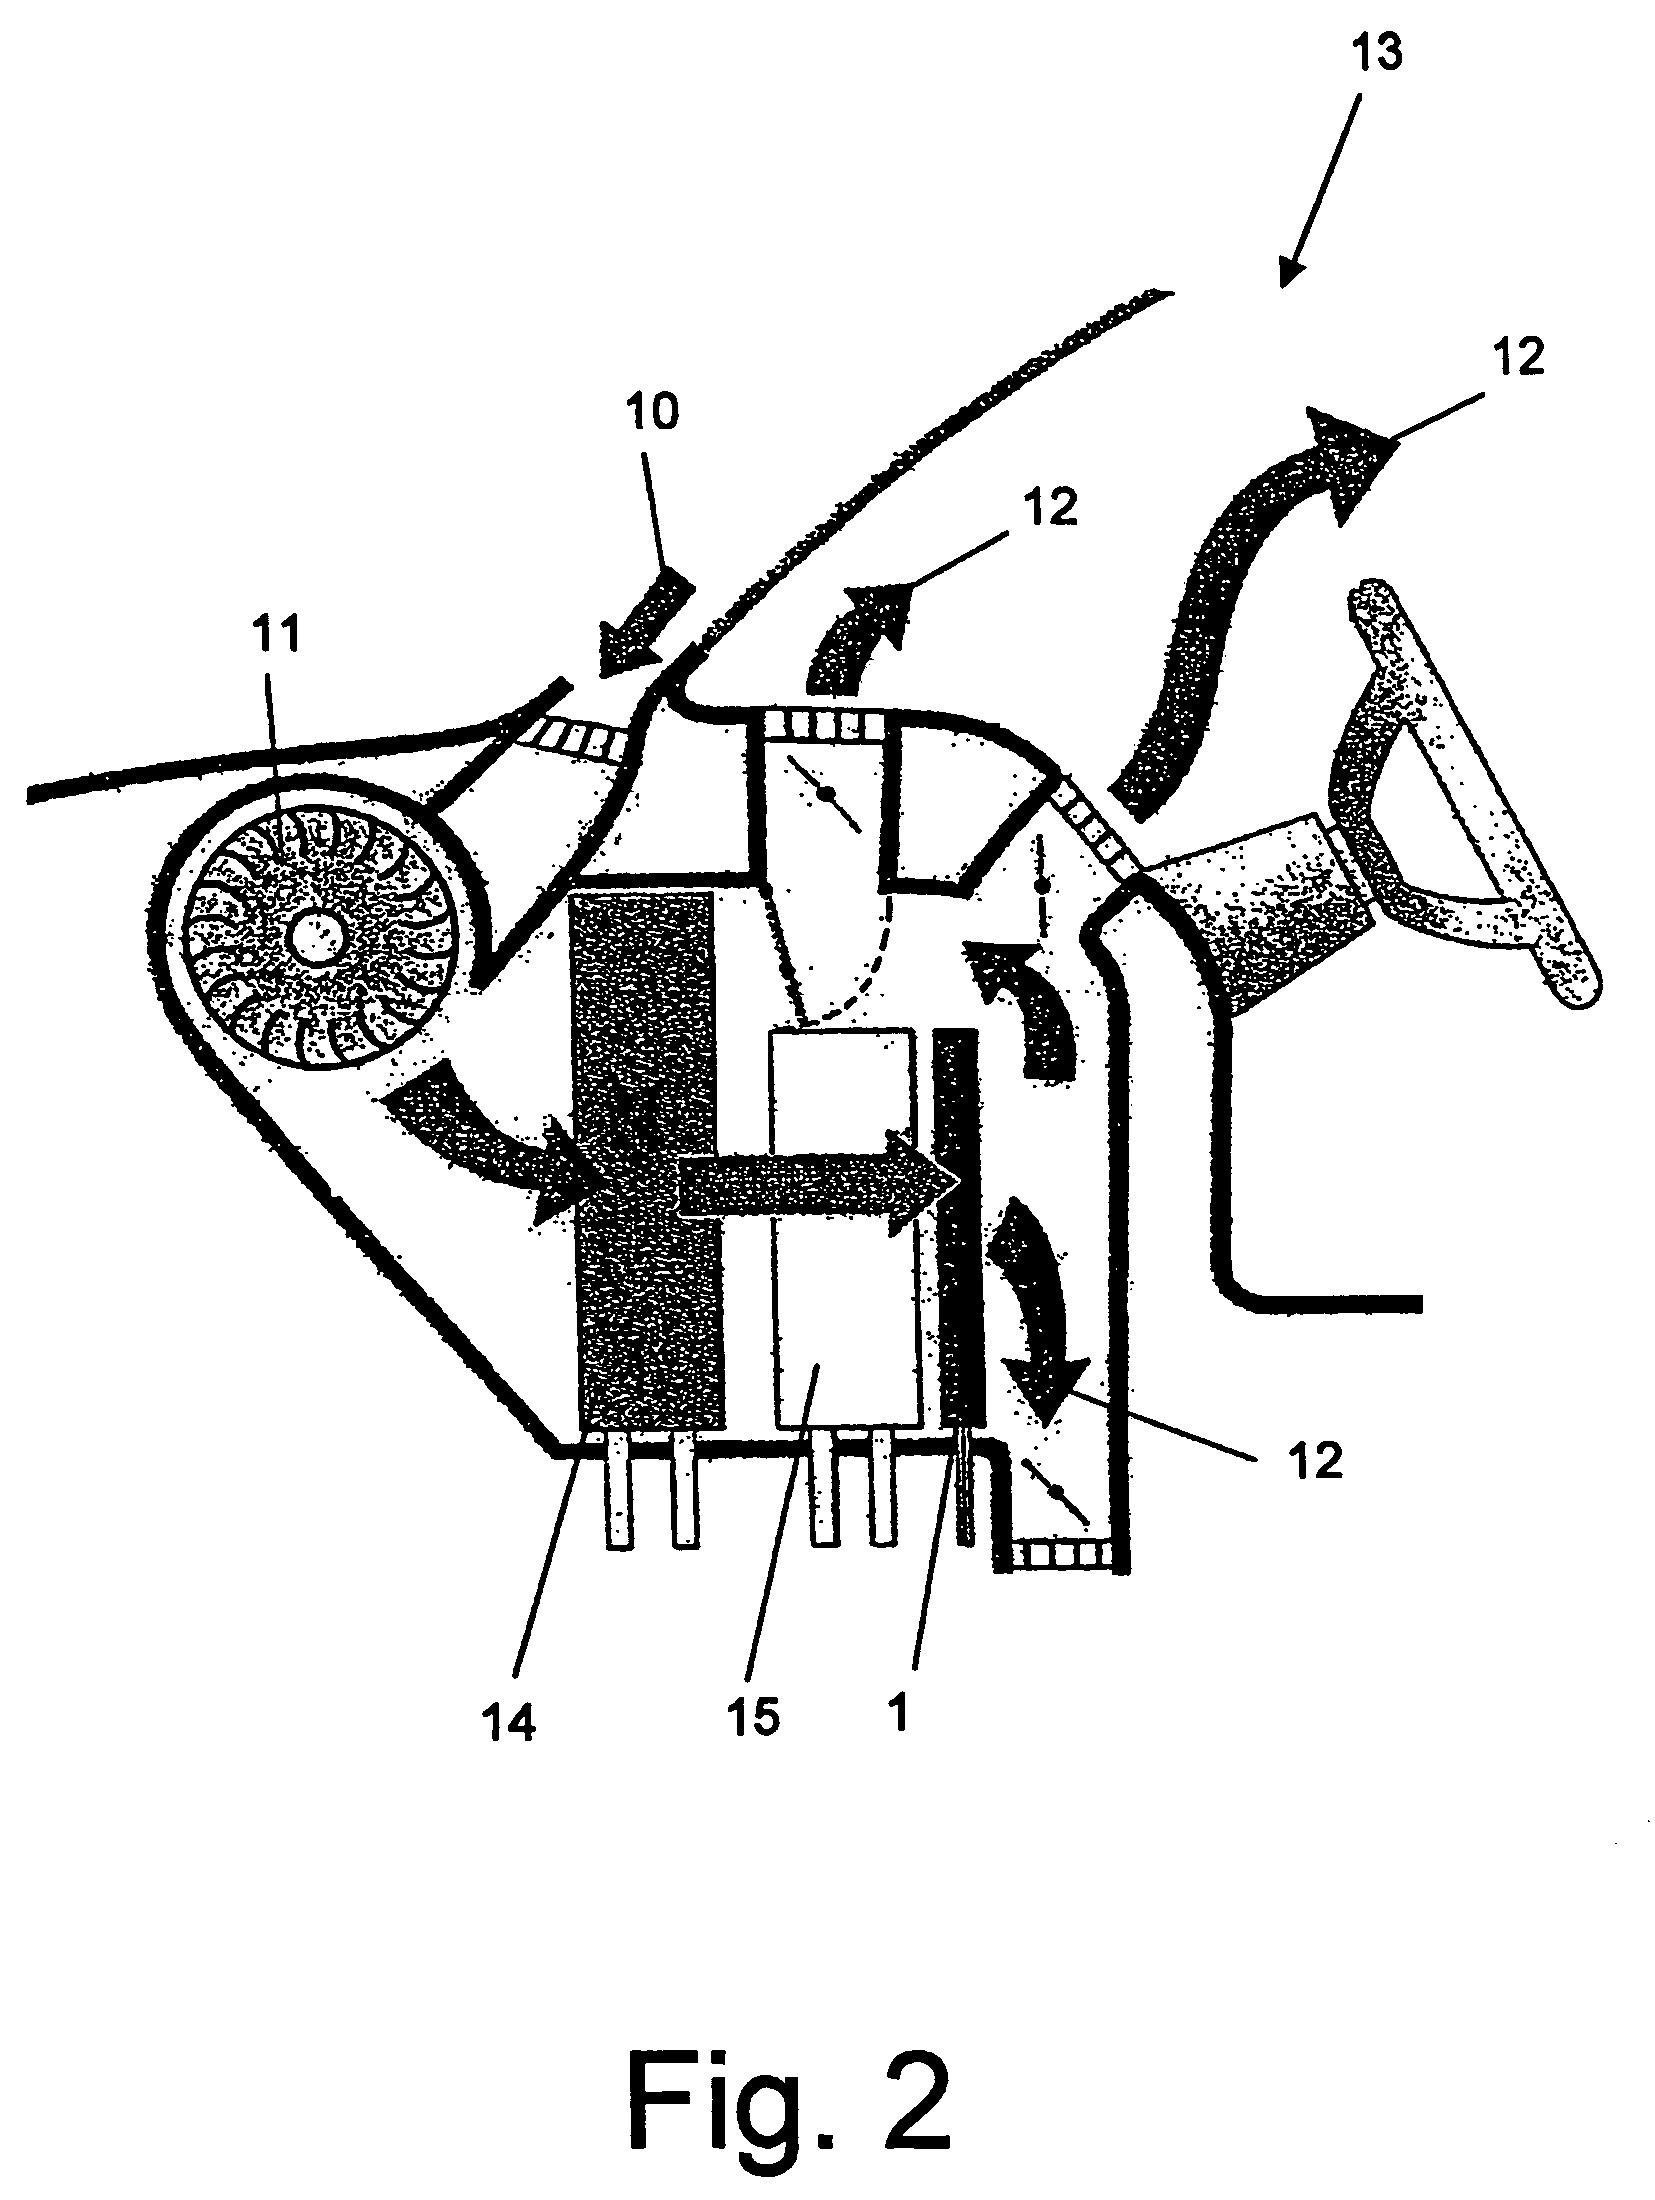 Electric heating device with heating zones